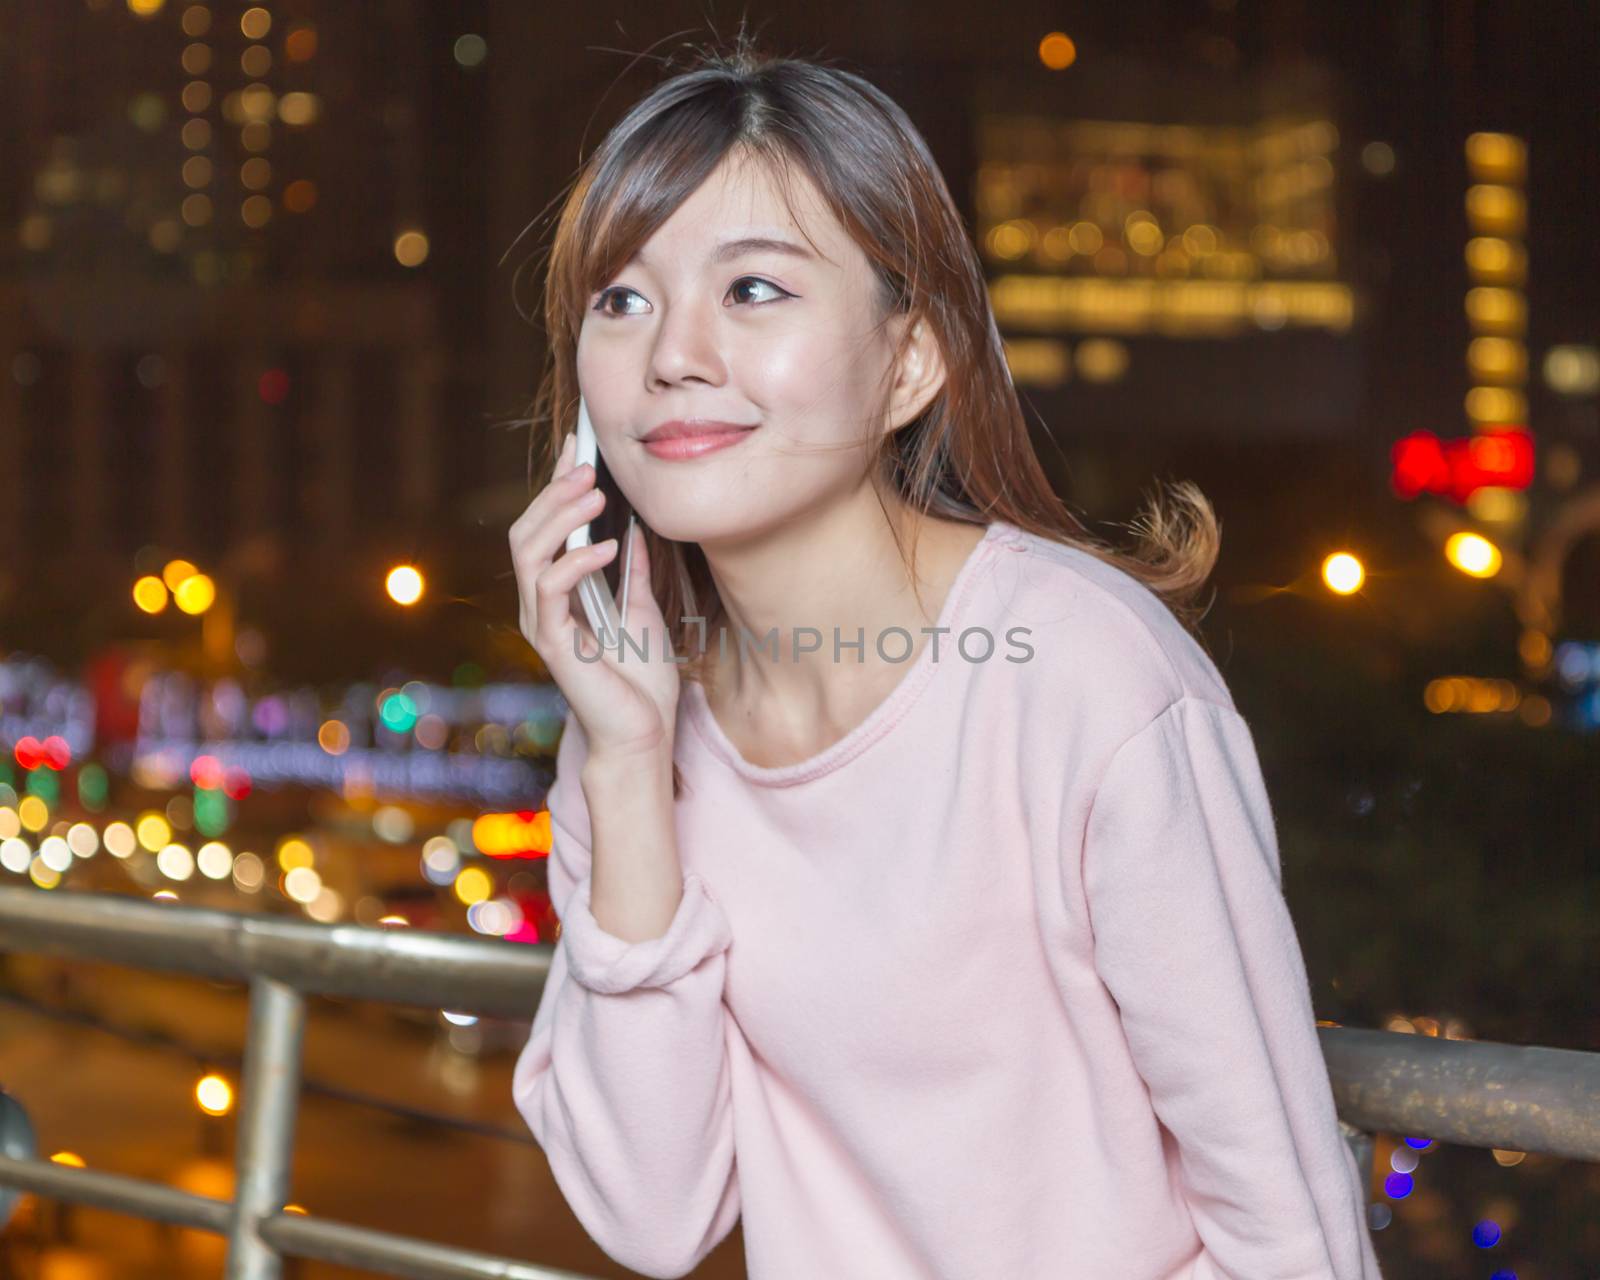 Beautiful young Asian woman with cellphone by imagesbykenny